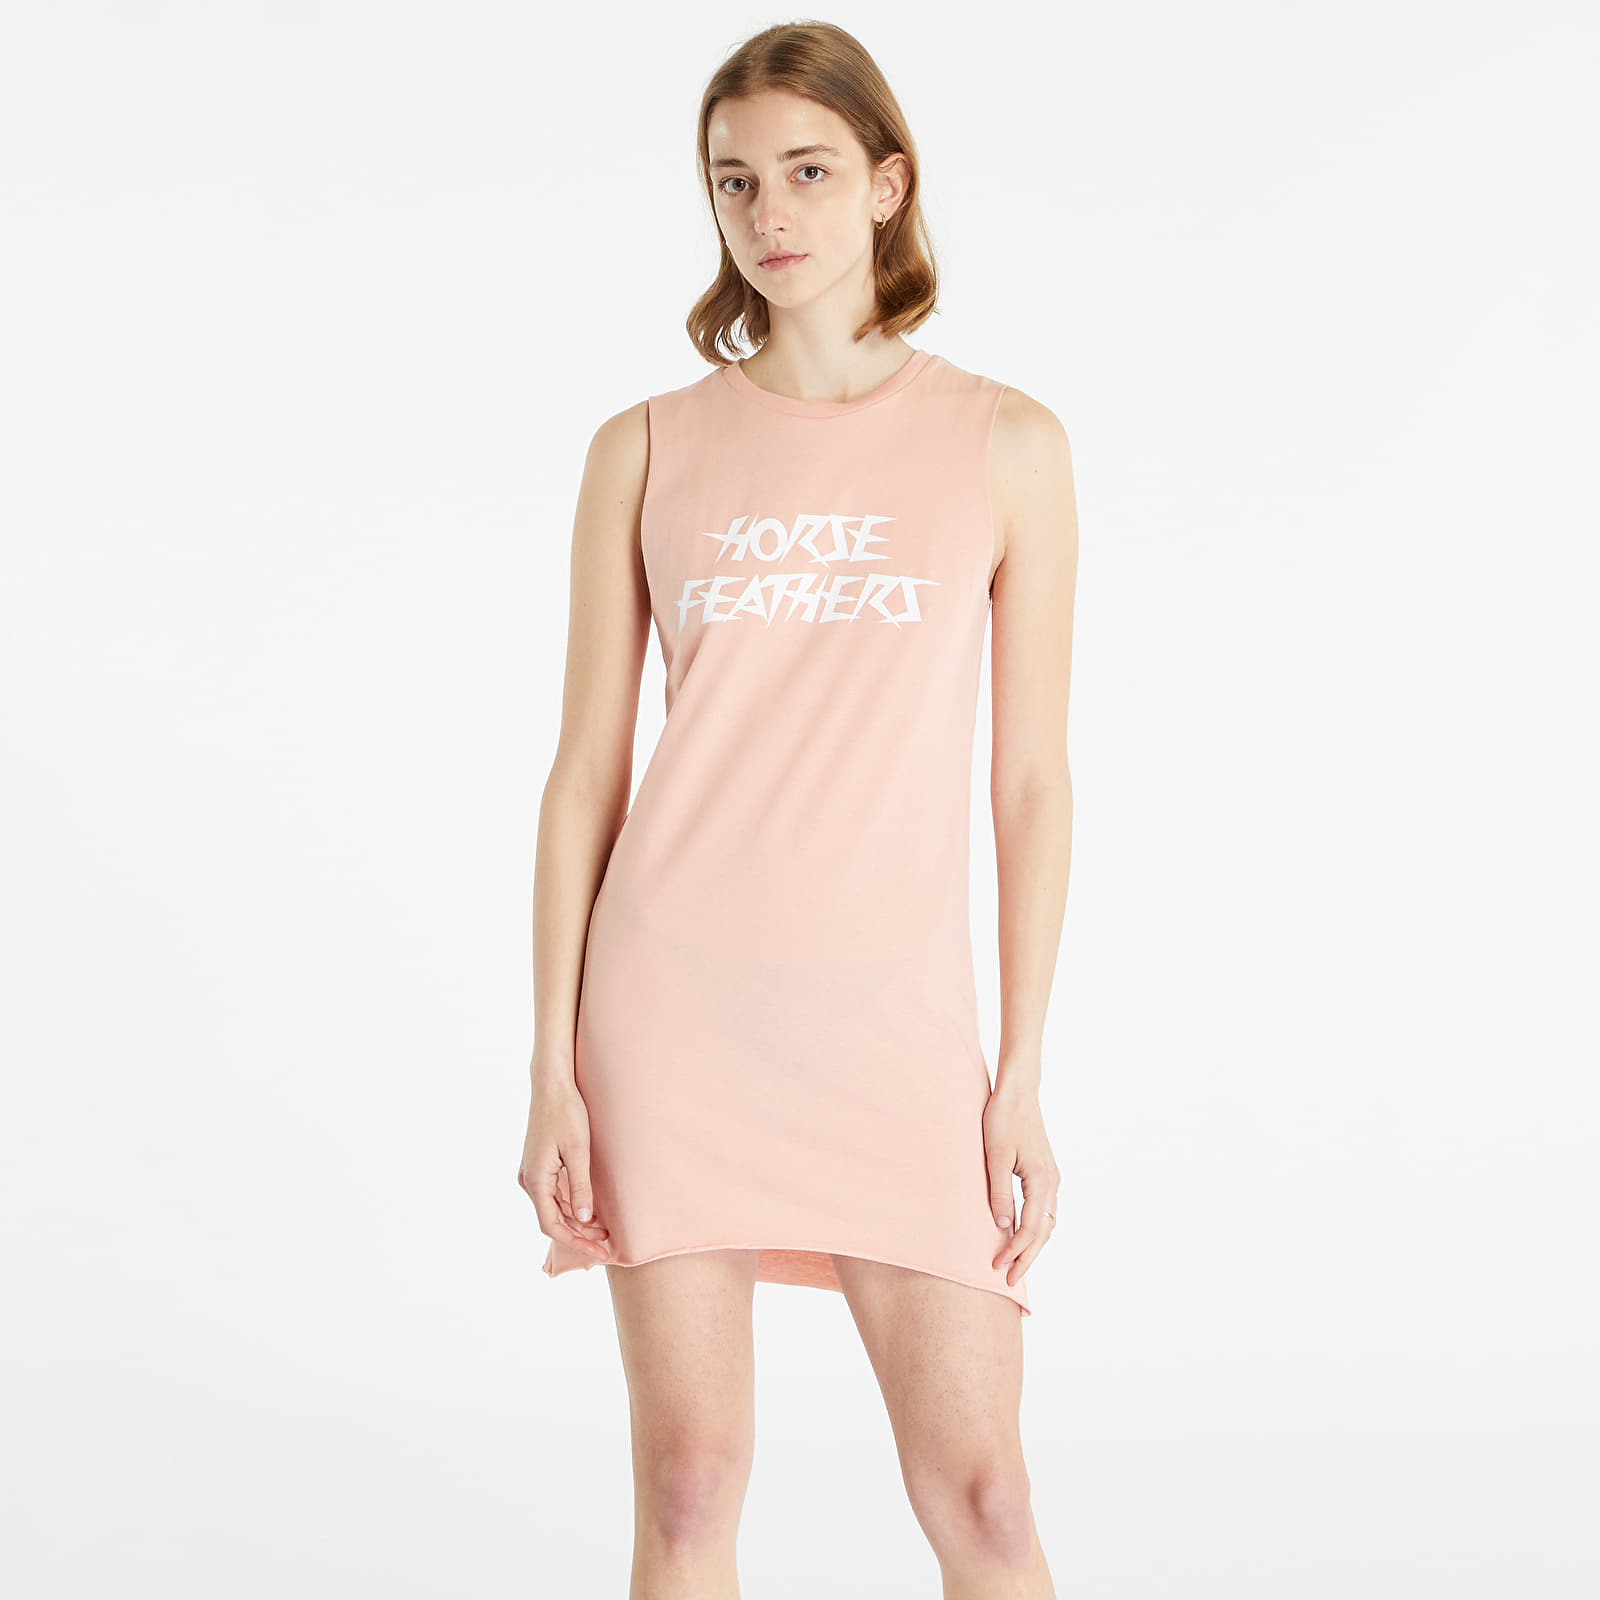 Dress Horsefeathers Laurie Dress Dusty Pink